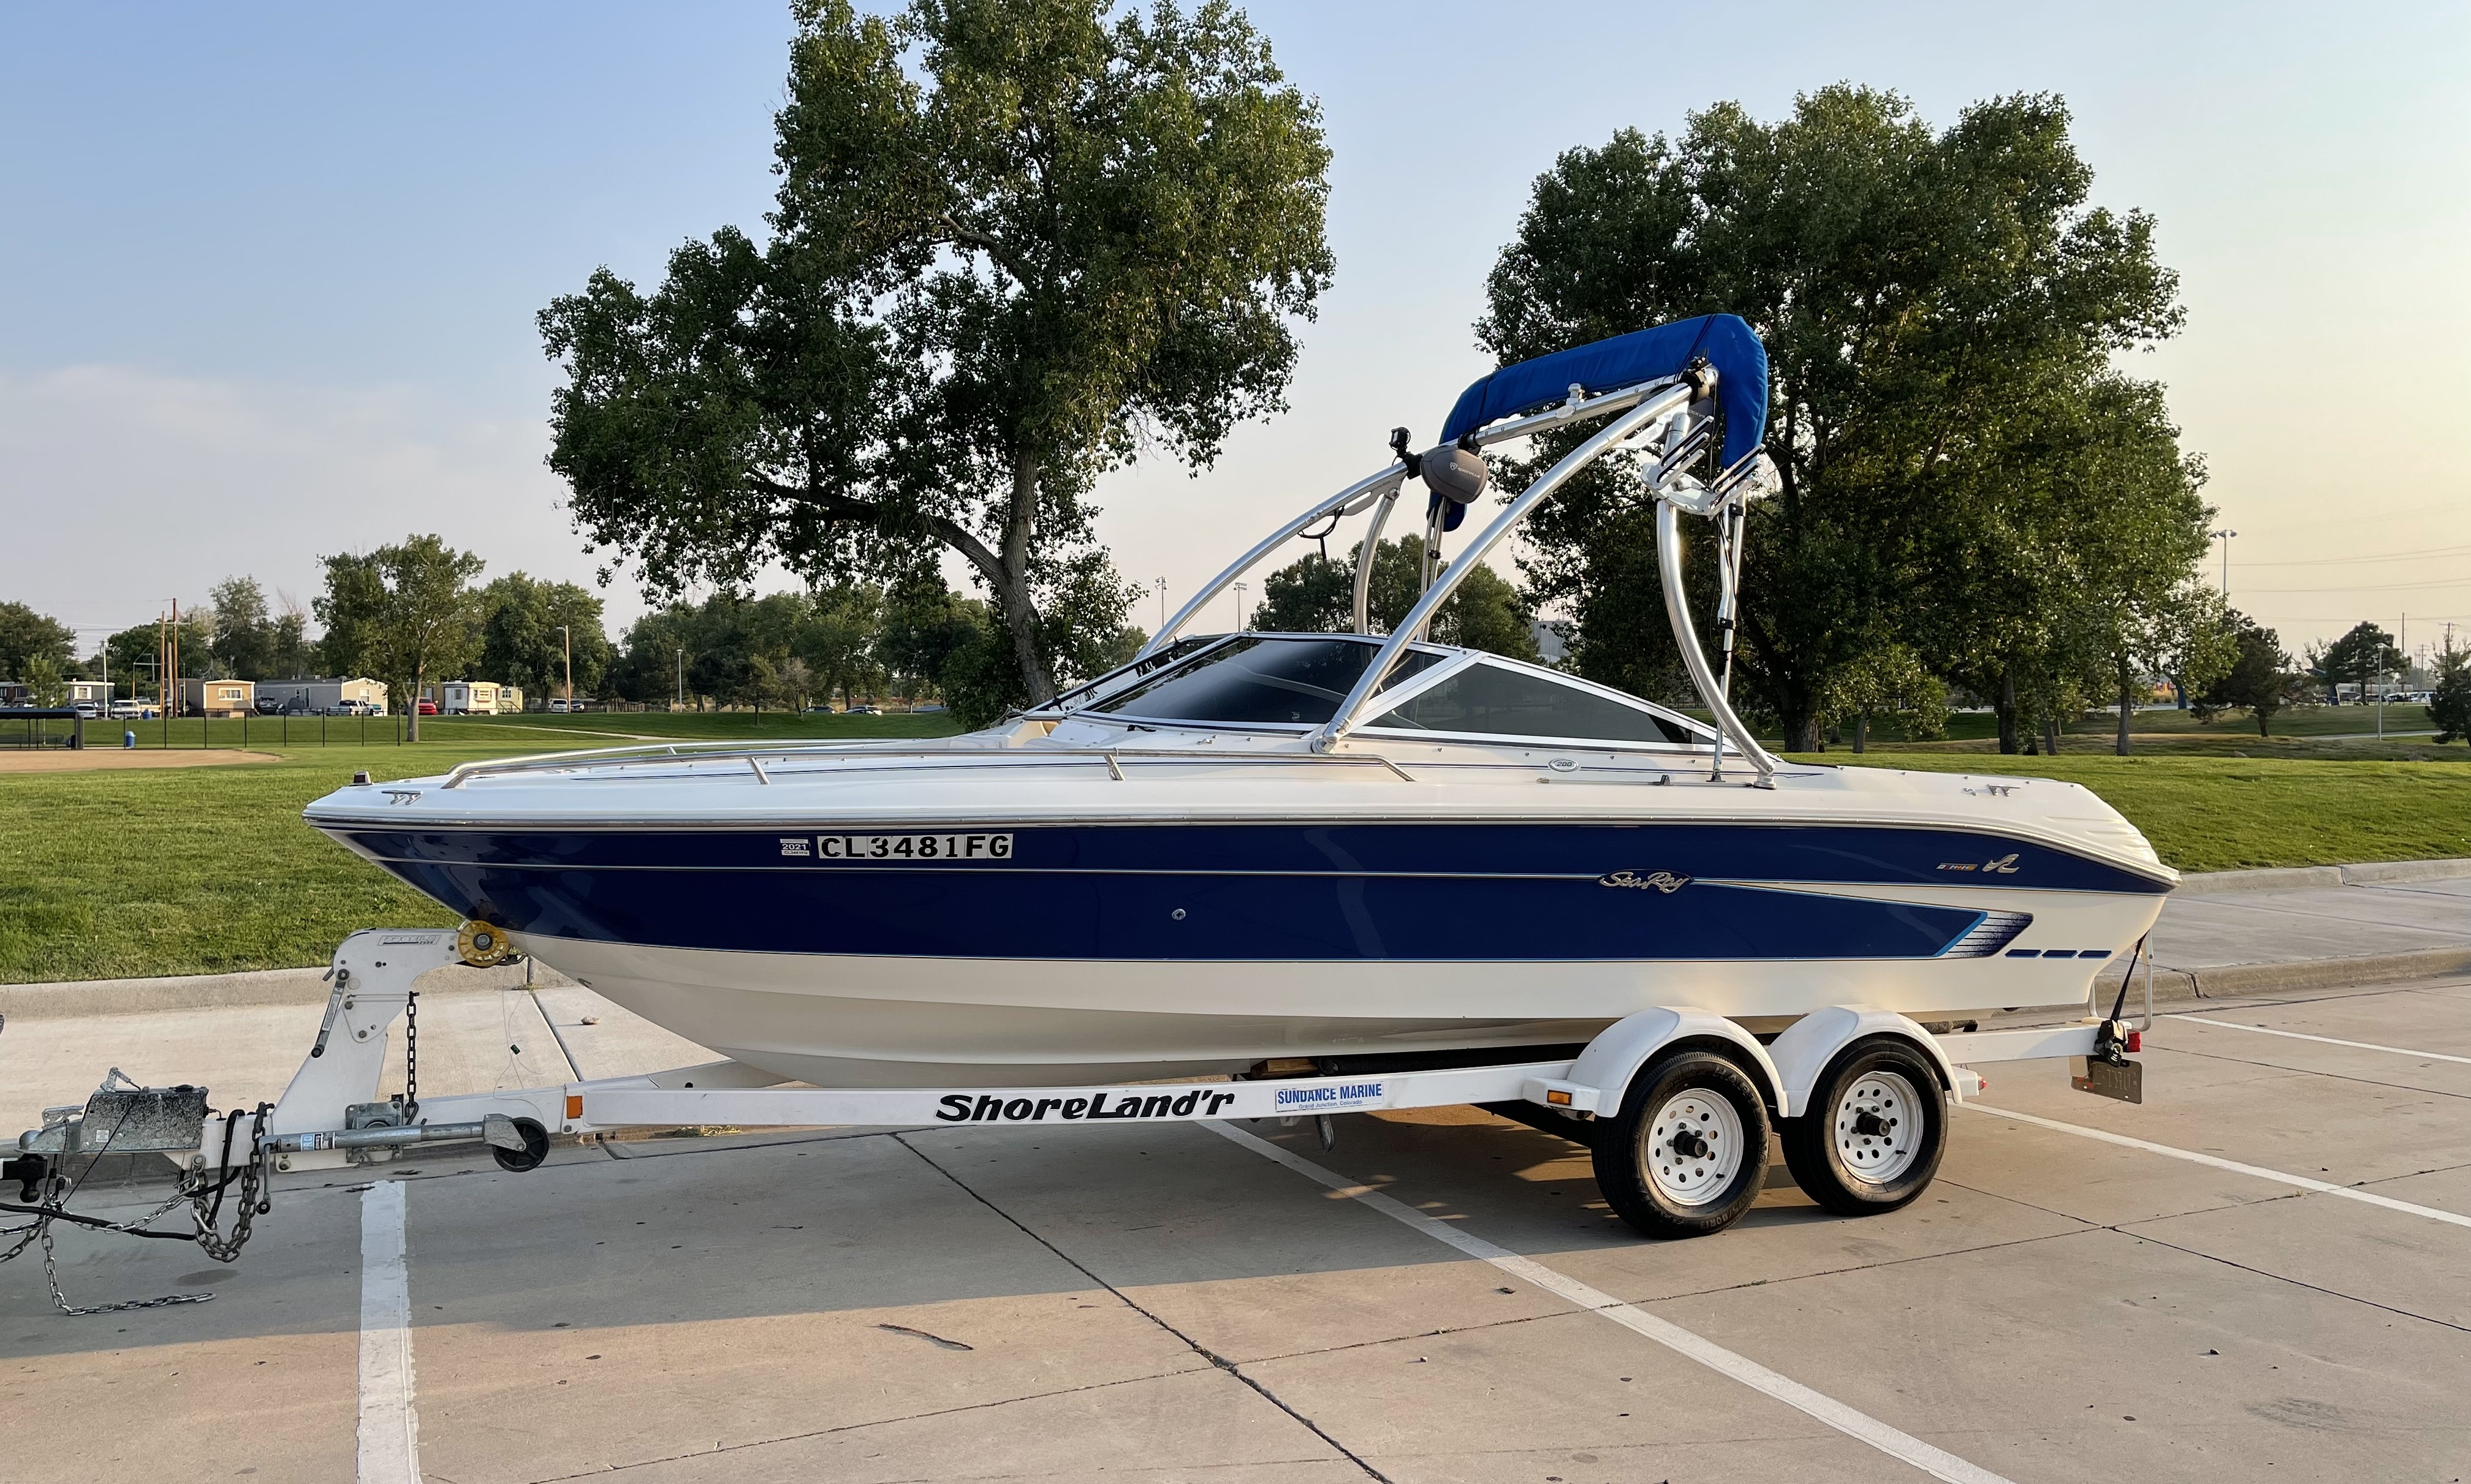 1995 Searay Bowrider 200, 21 ft Ski Boat, with; Wake Board Tower, Bimini Top, Premium Sound System, LED Lights, Performance Engine High 5 Stainless Steel Propeller! | GetMyBoat